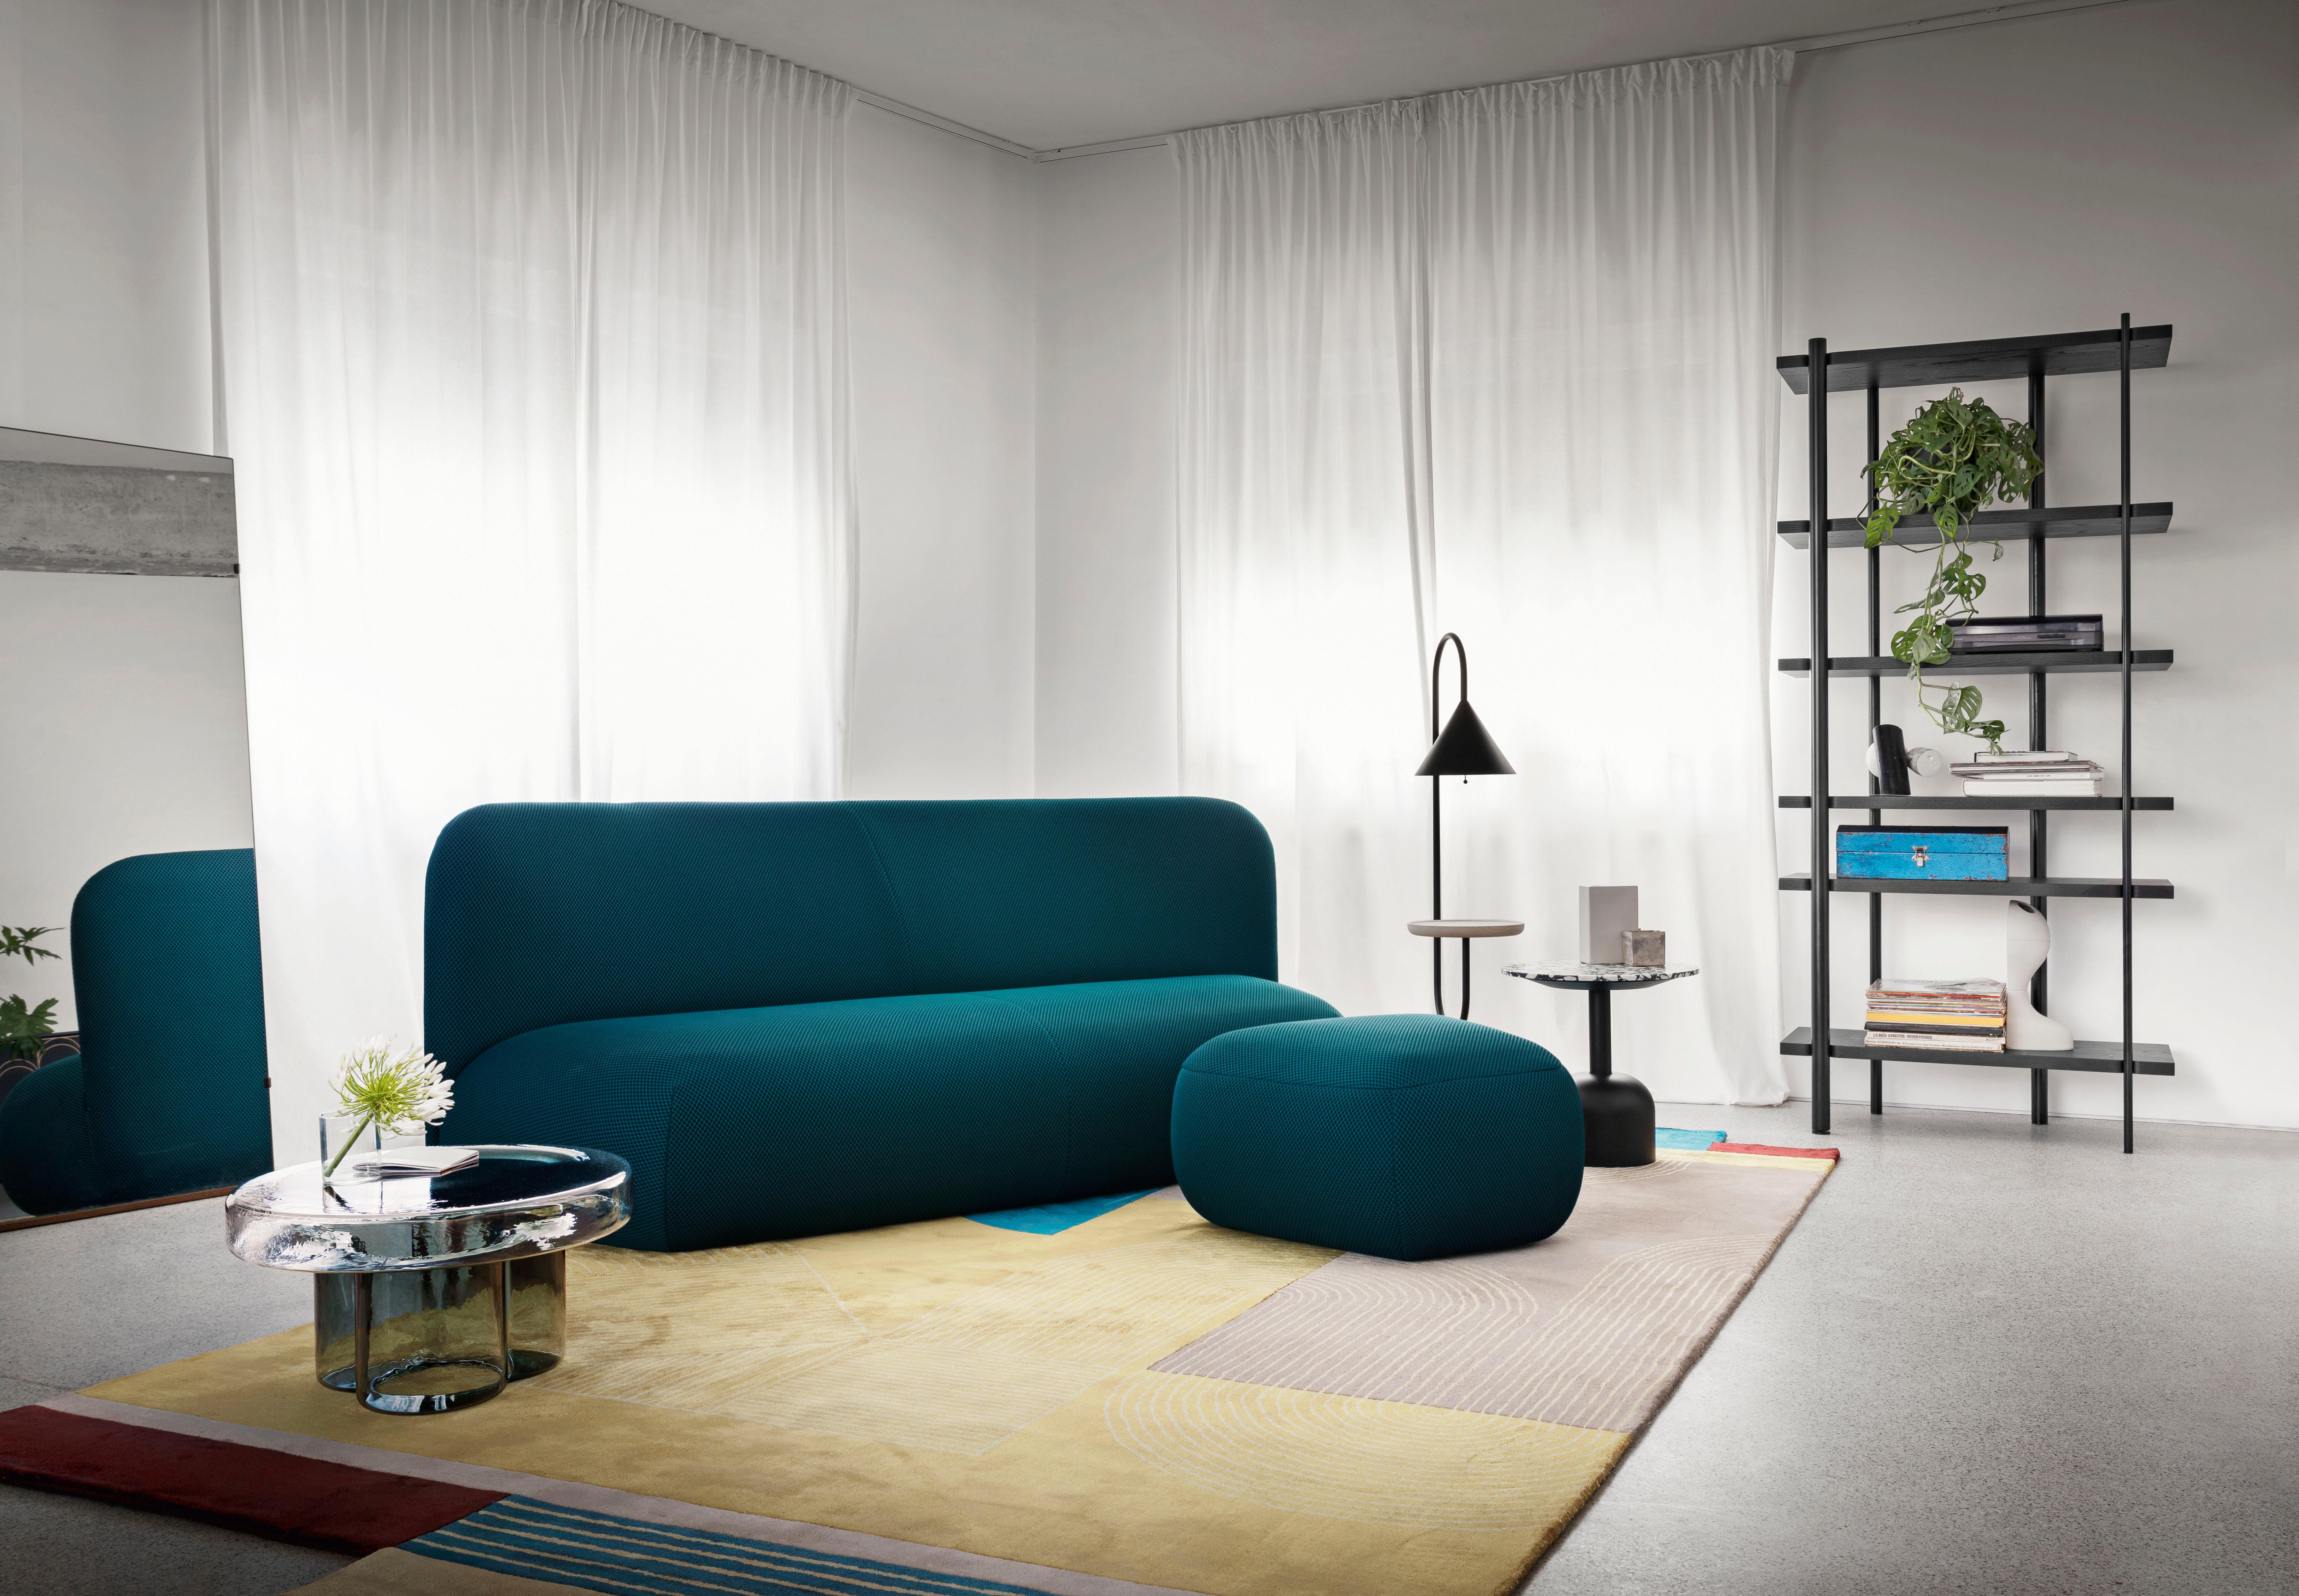 Botera was born to be comfortable, everywhere. To better exploit the volumes of the armchair in all situations, we have made it an entire family of modular upholstered furniture, amplifying the seating possibilities. To relax, doze off, raise your